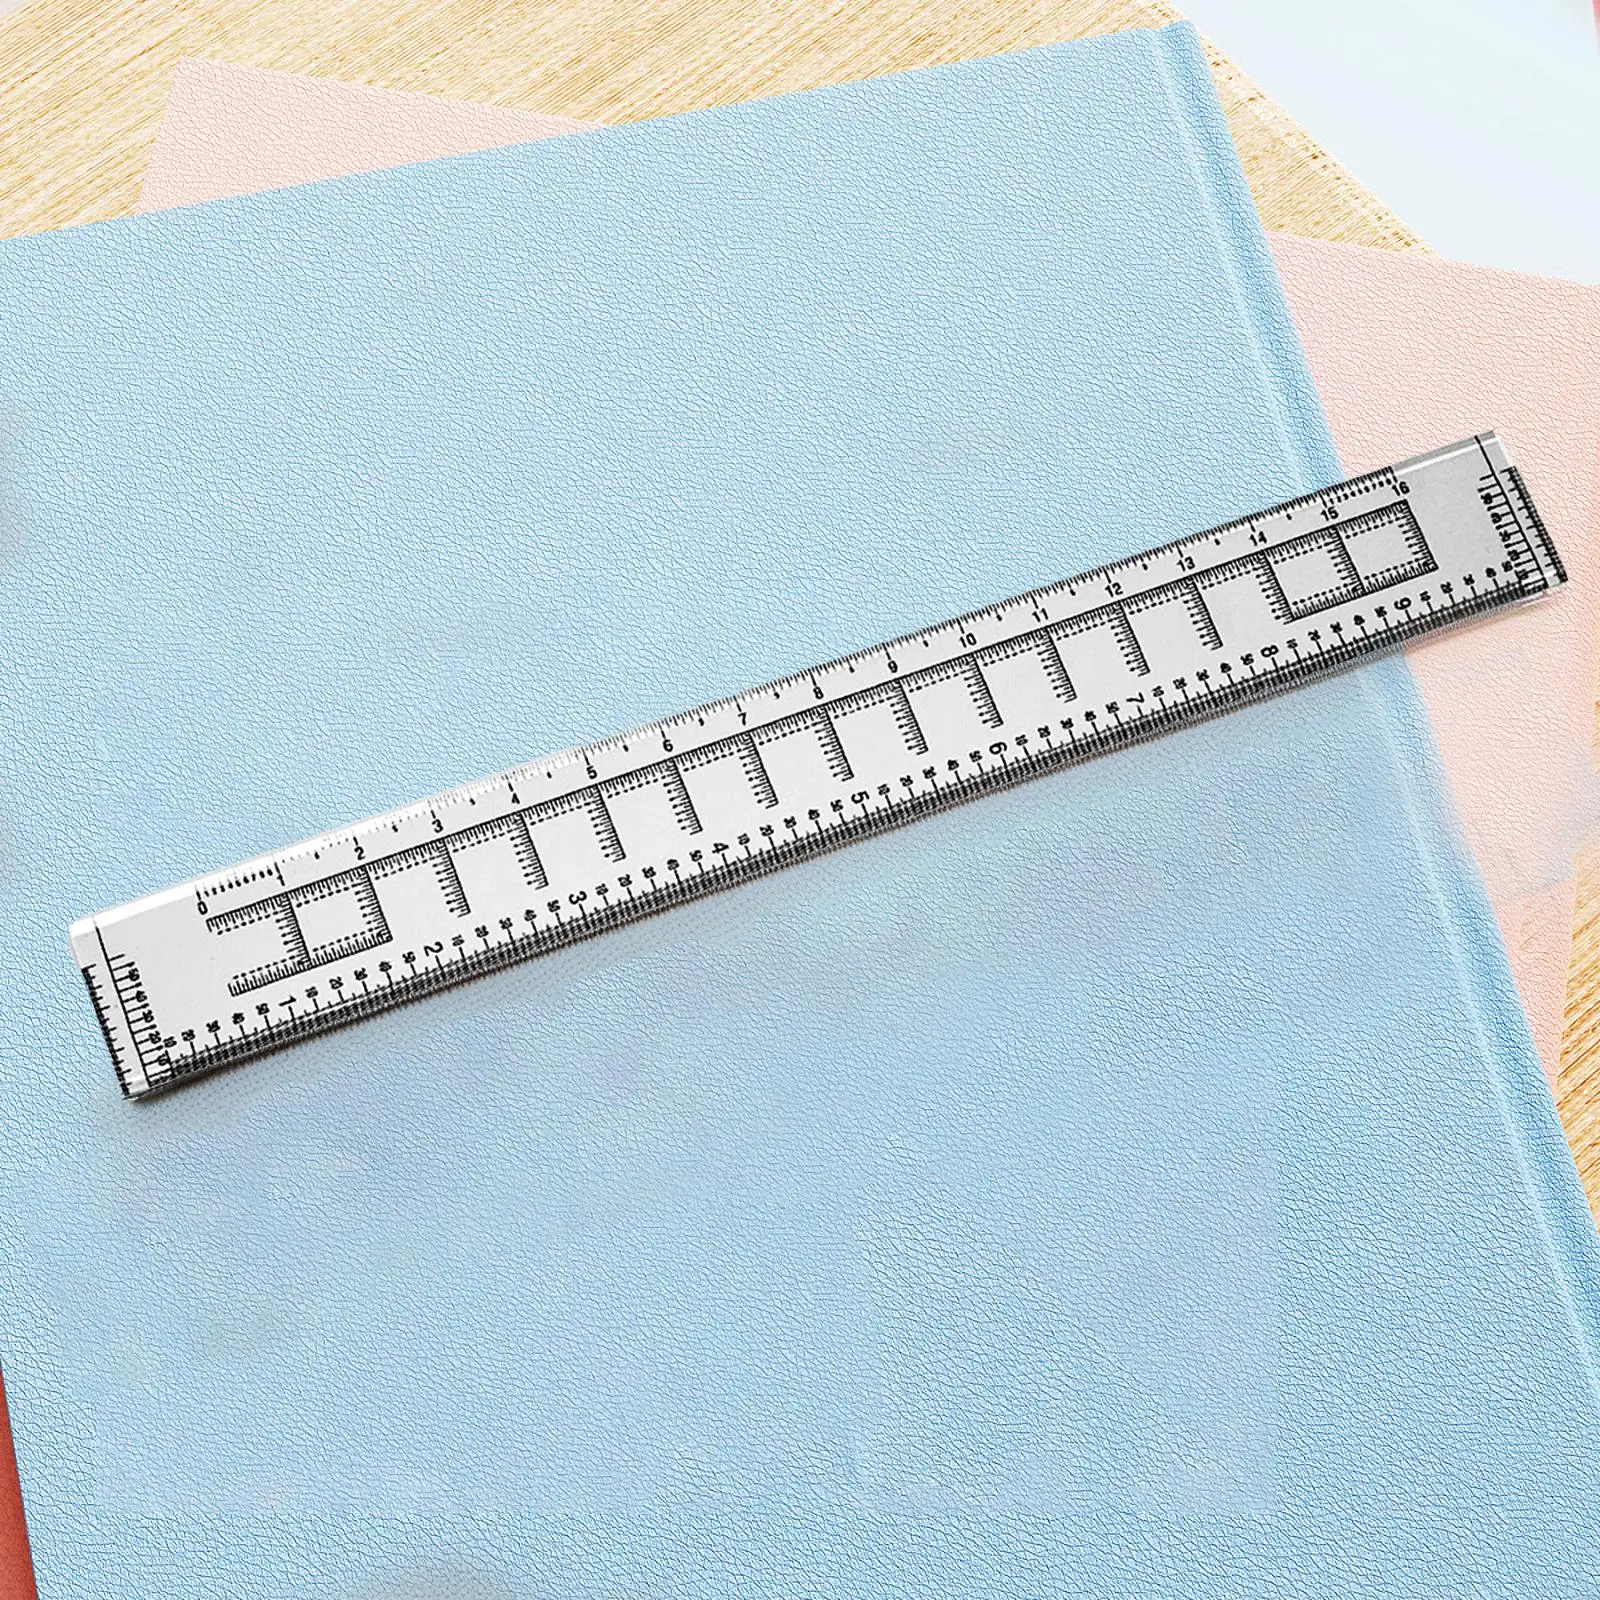 1:50000 Grid Coordinate Reader Coordinate Scale Ruler for Outdoor Map Reading Working Traveling Land Navigation Topographical